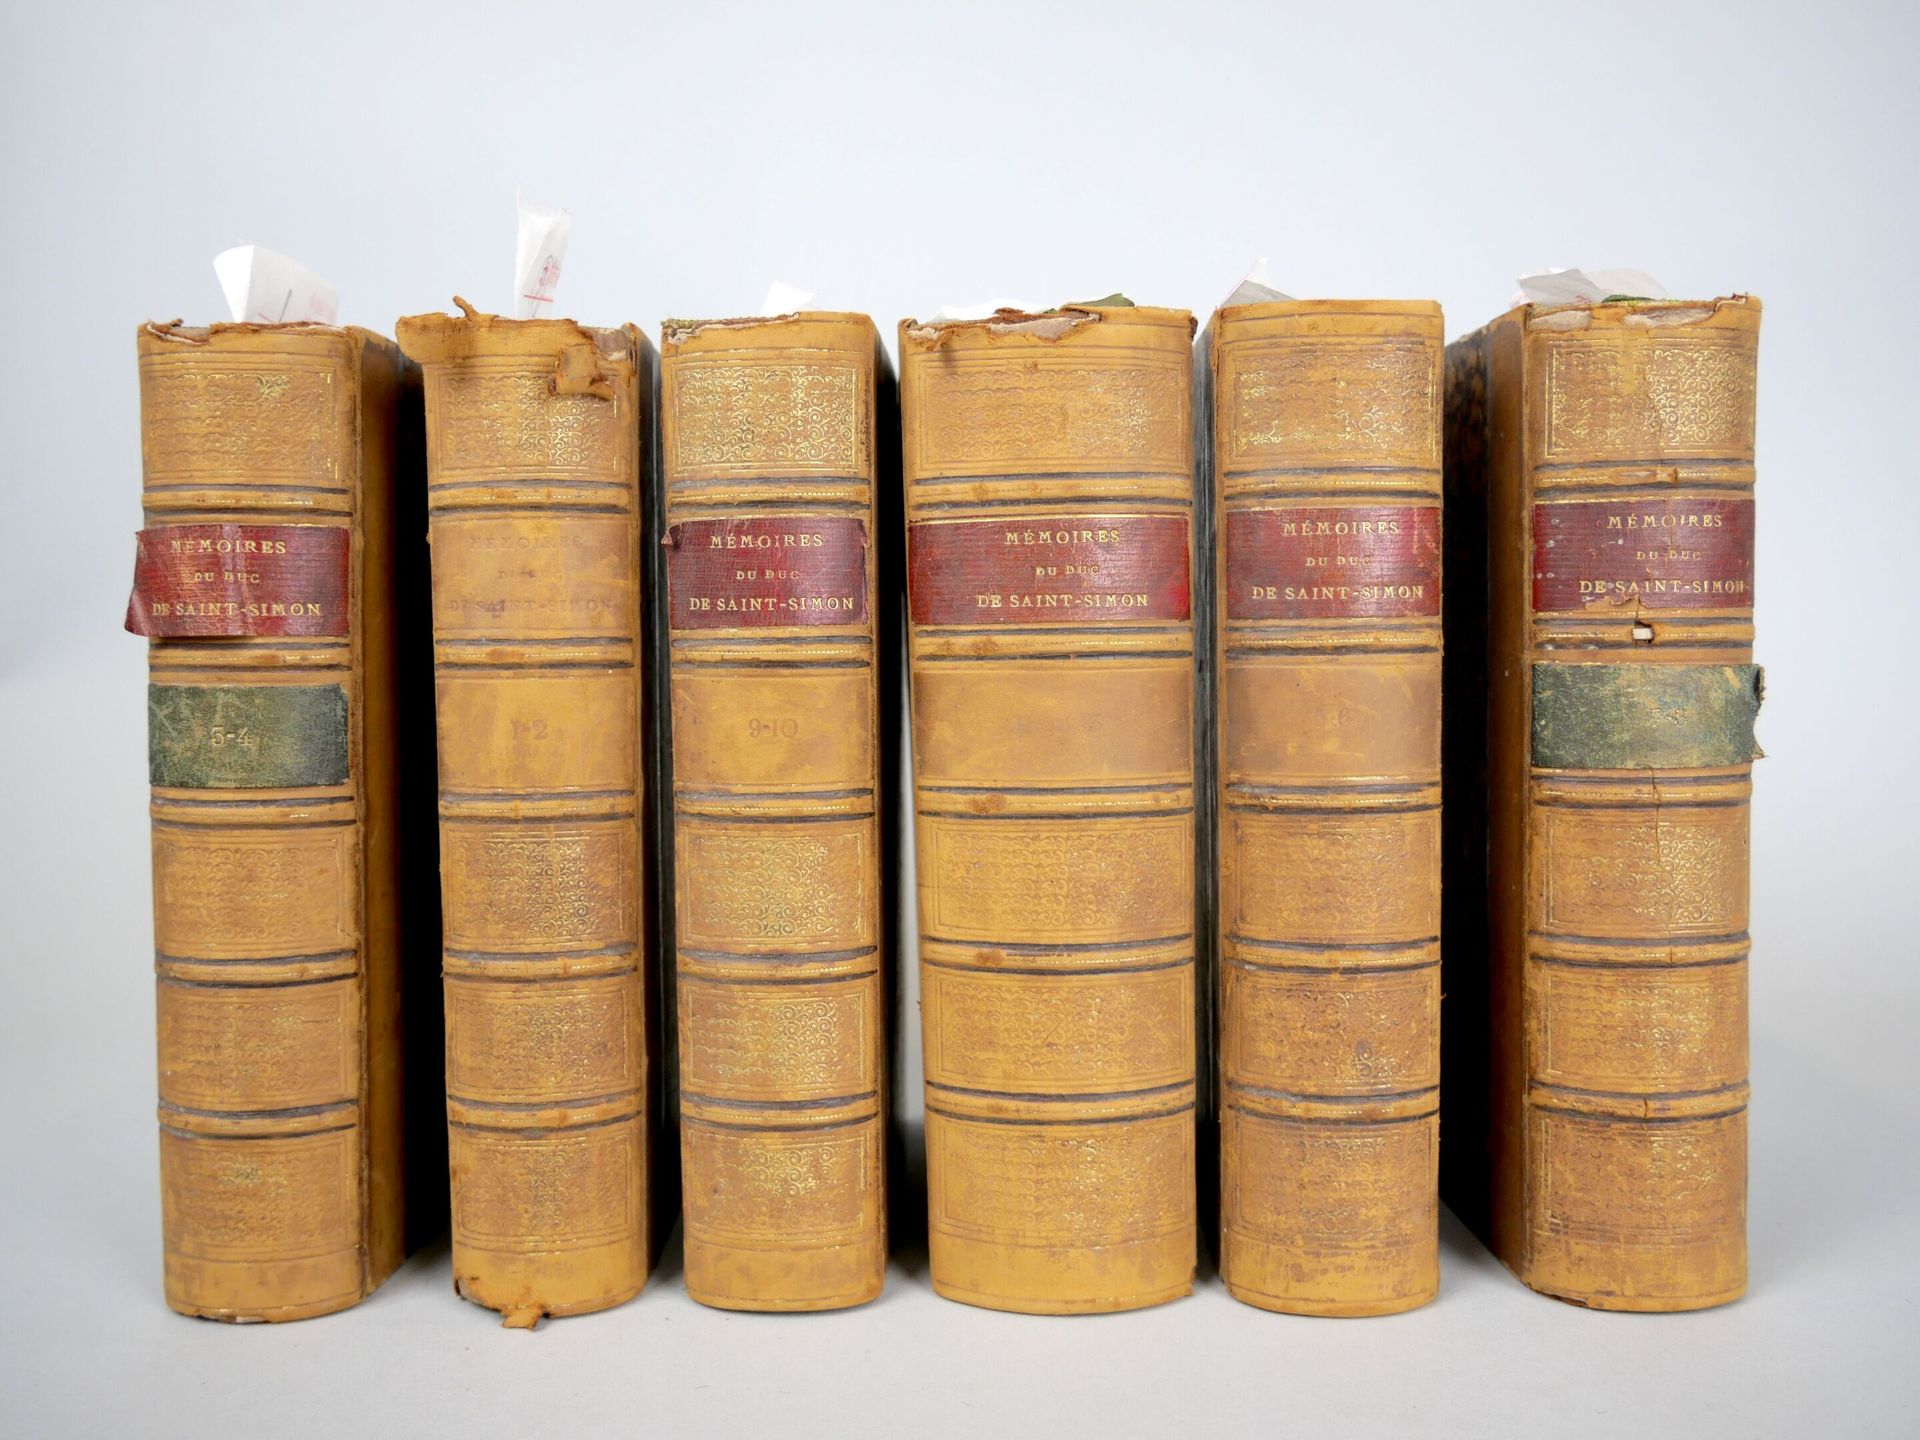 Null [MEMOIRES]
Set of 6 Volumes, gathering 13 volumes.
Complete and authentic m&hellip;